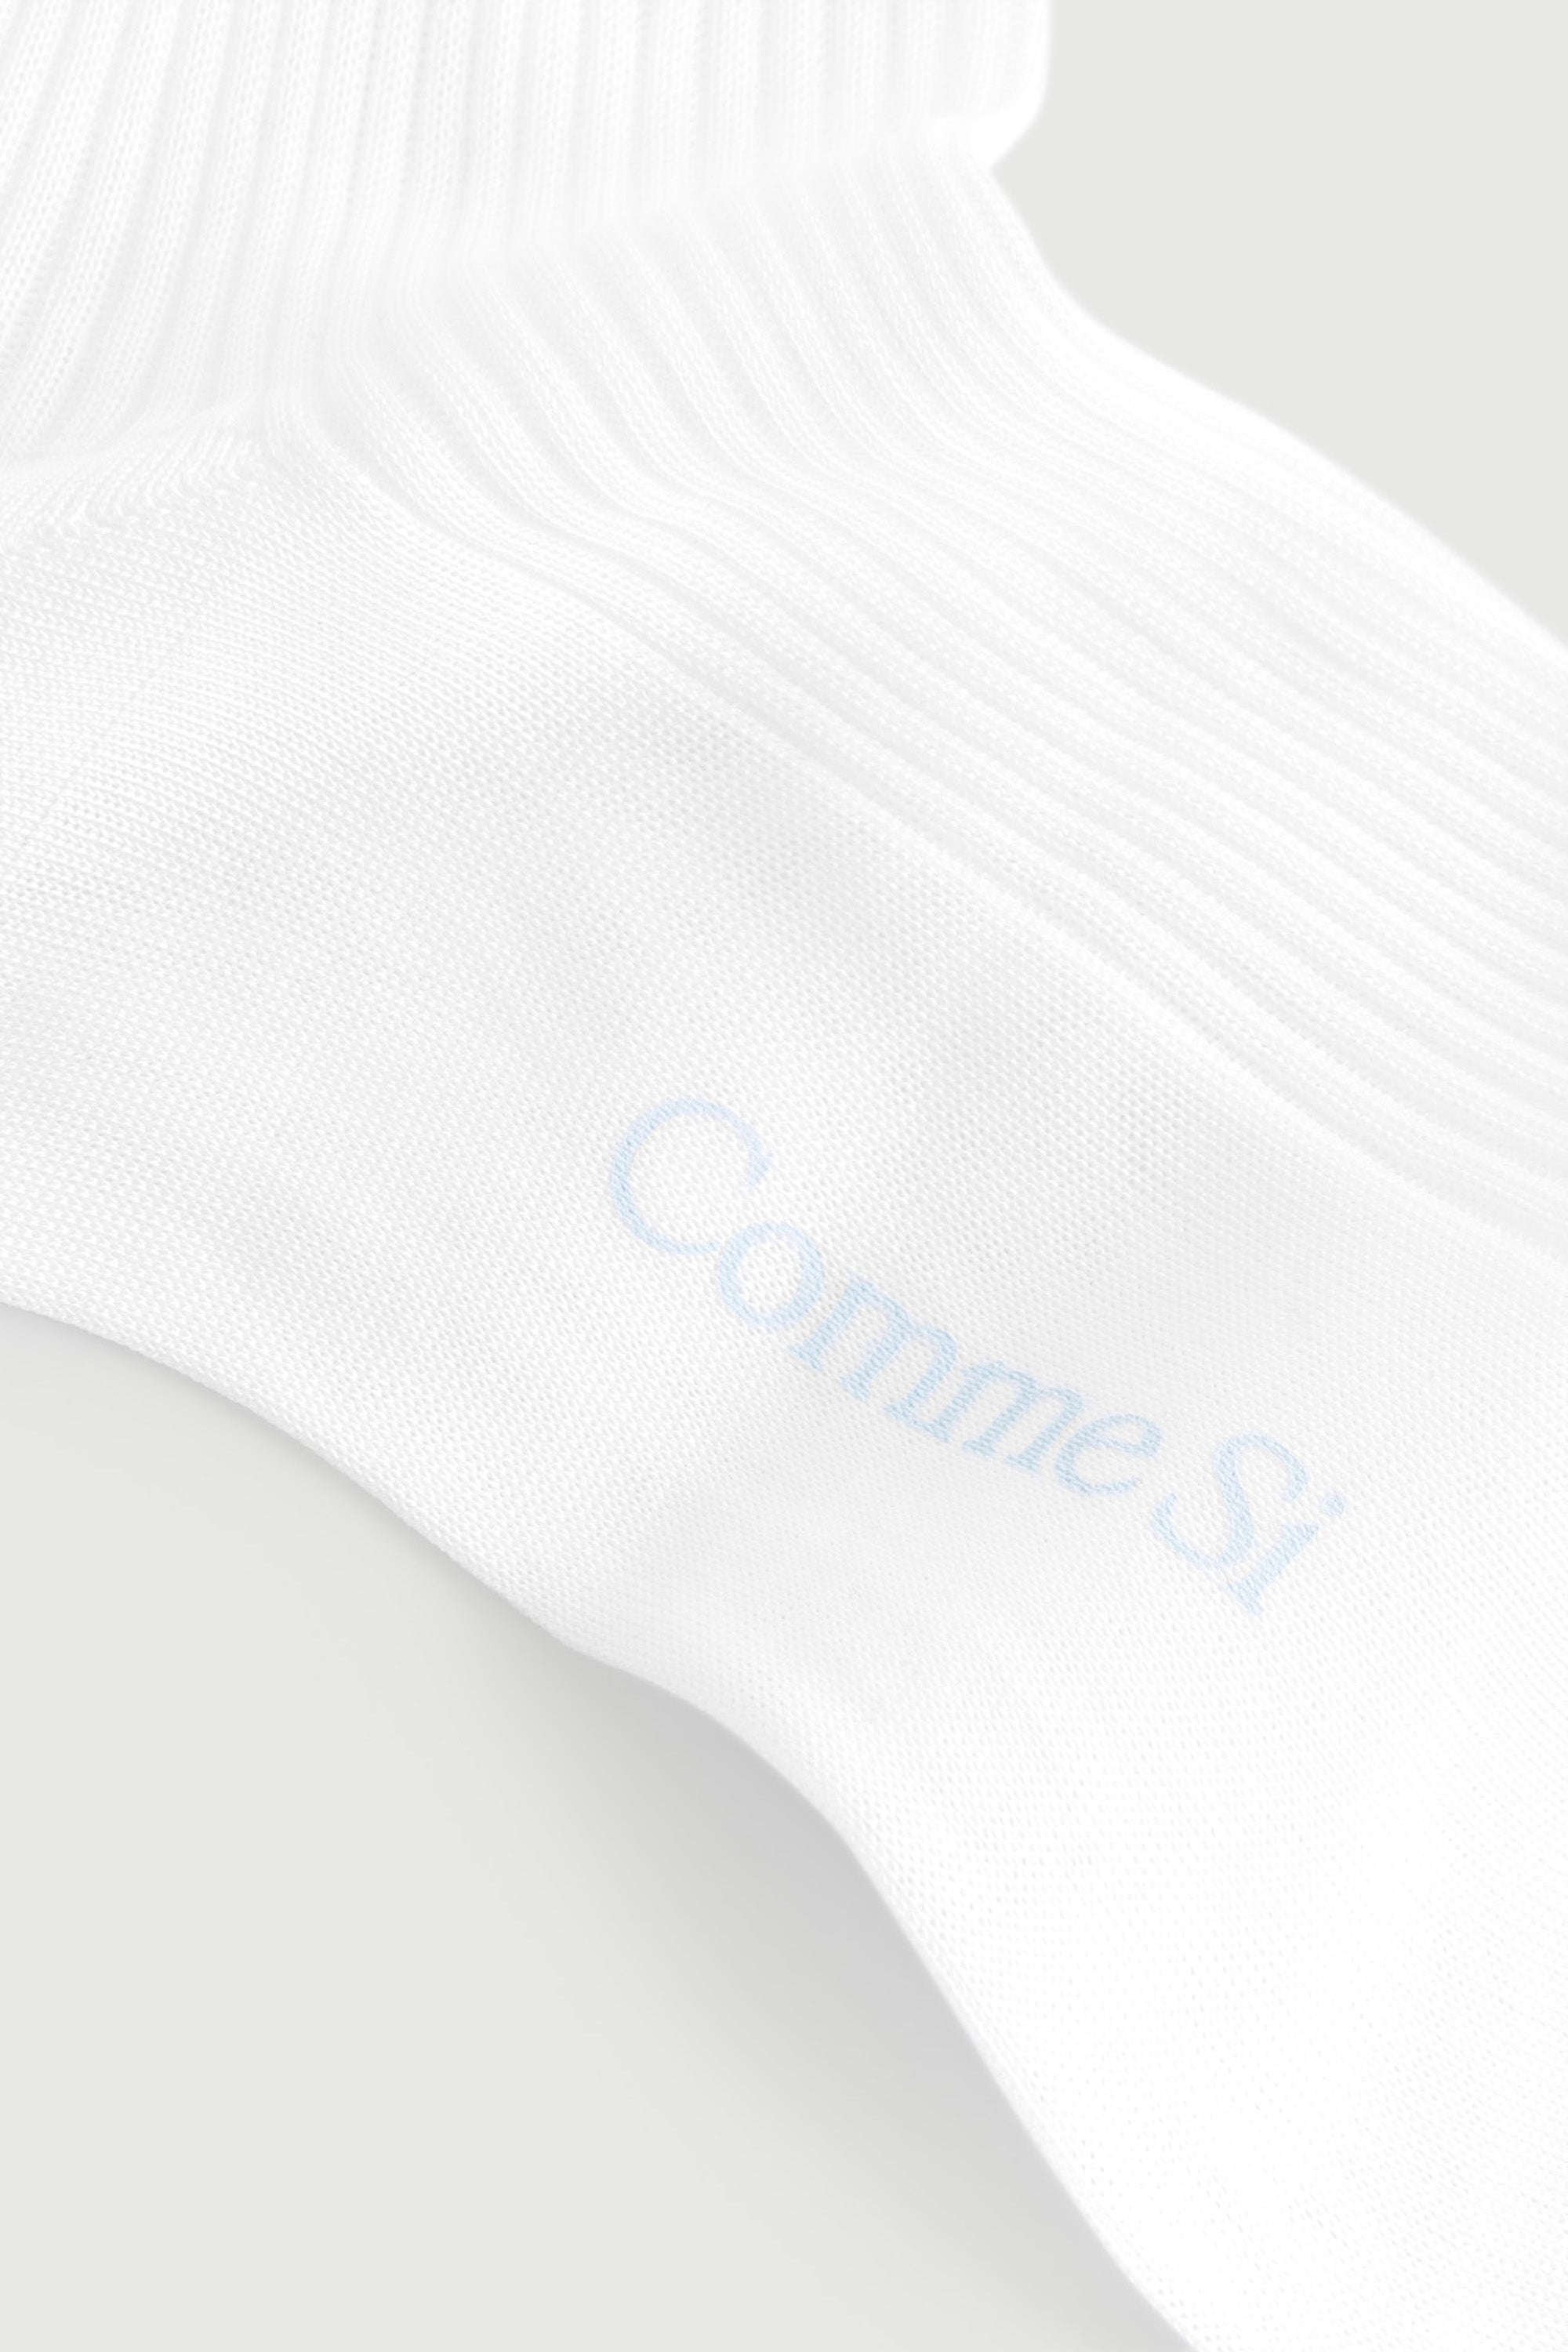 Detail of The Agnelli Sock in White, Egyptian Cotton